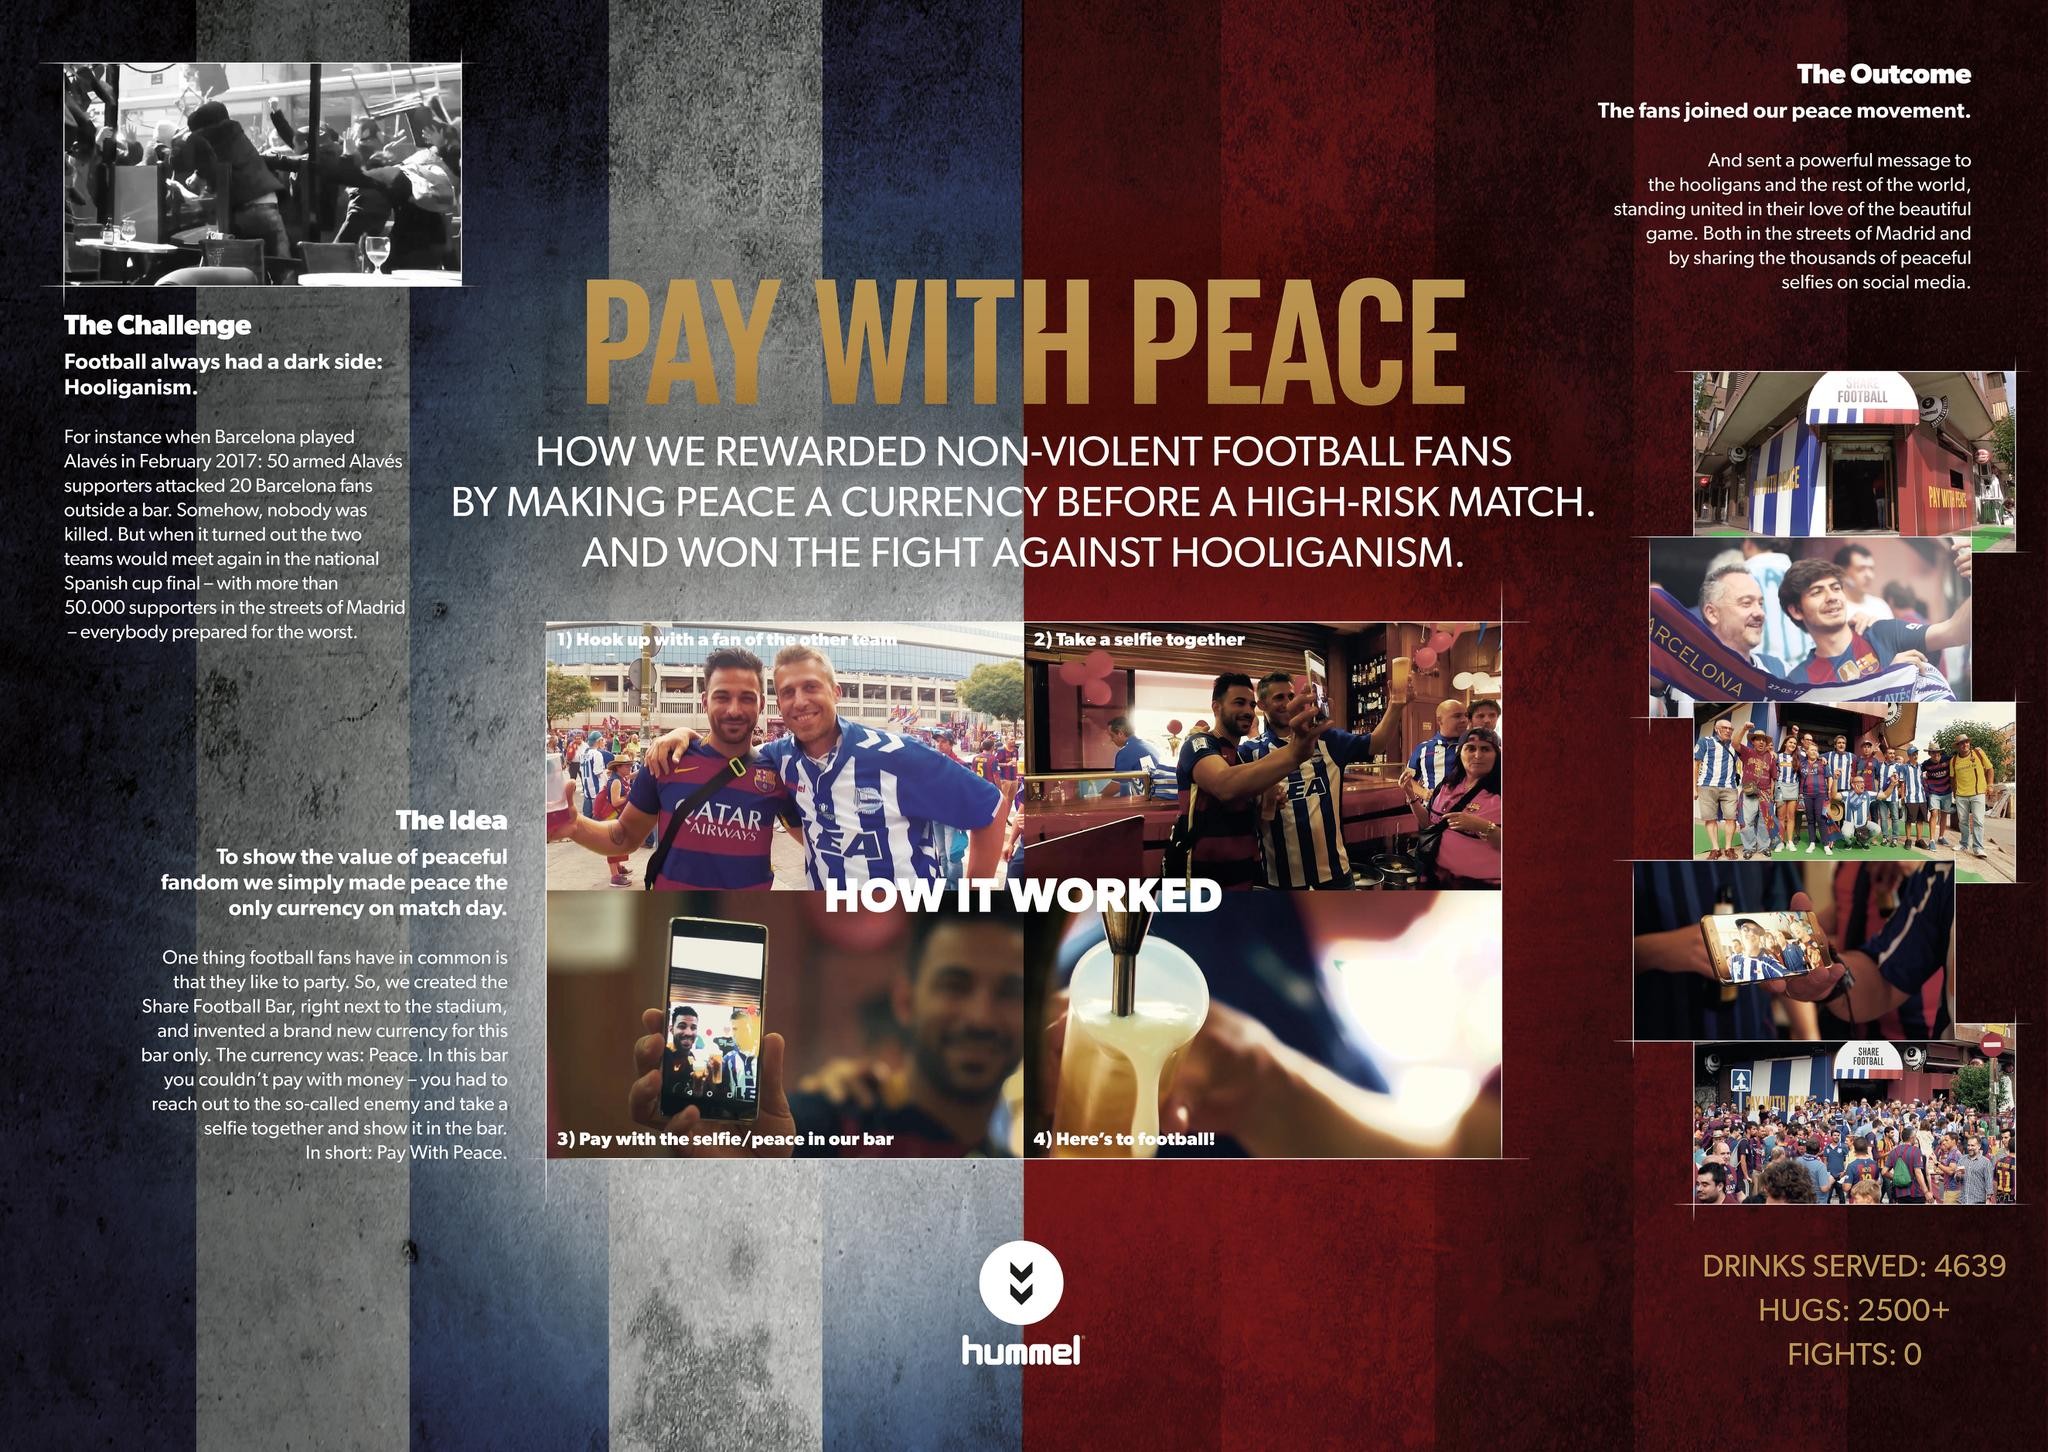 Pay With Peace